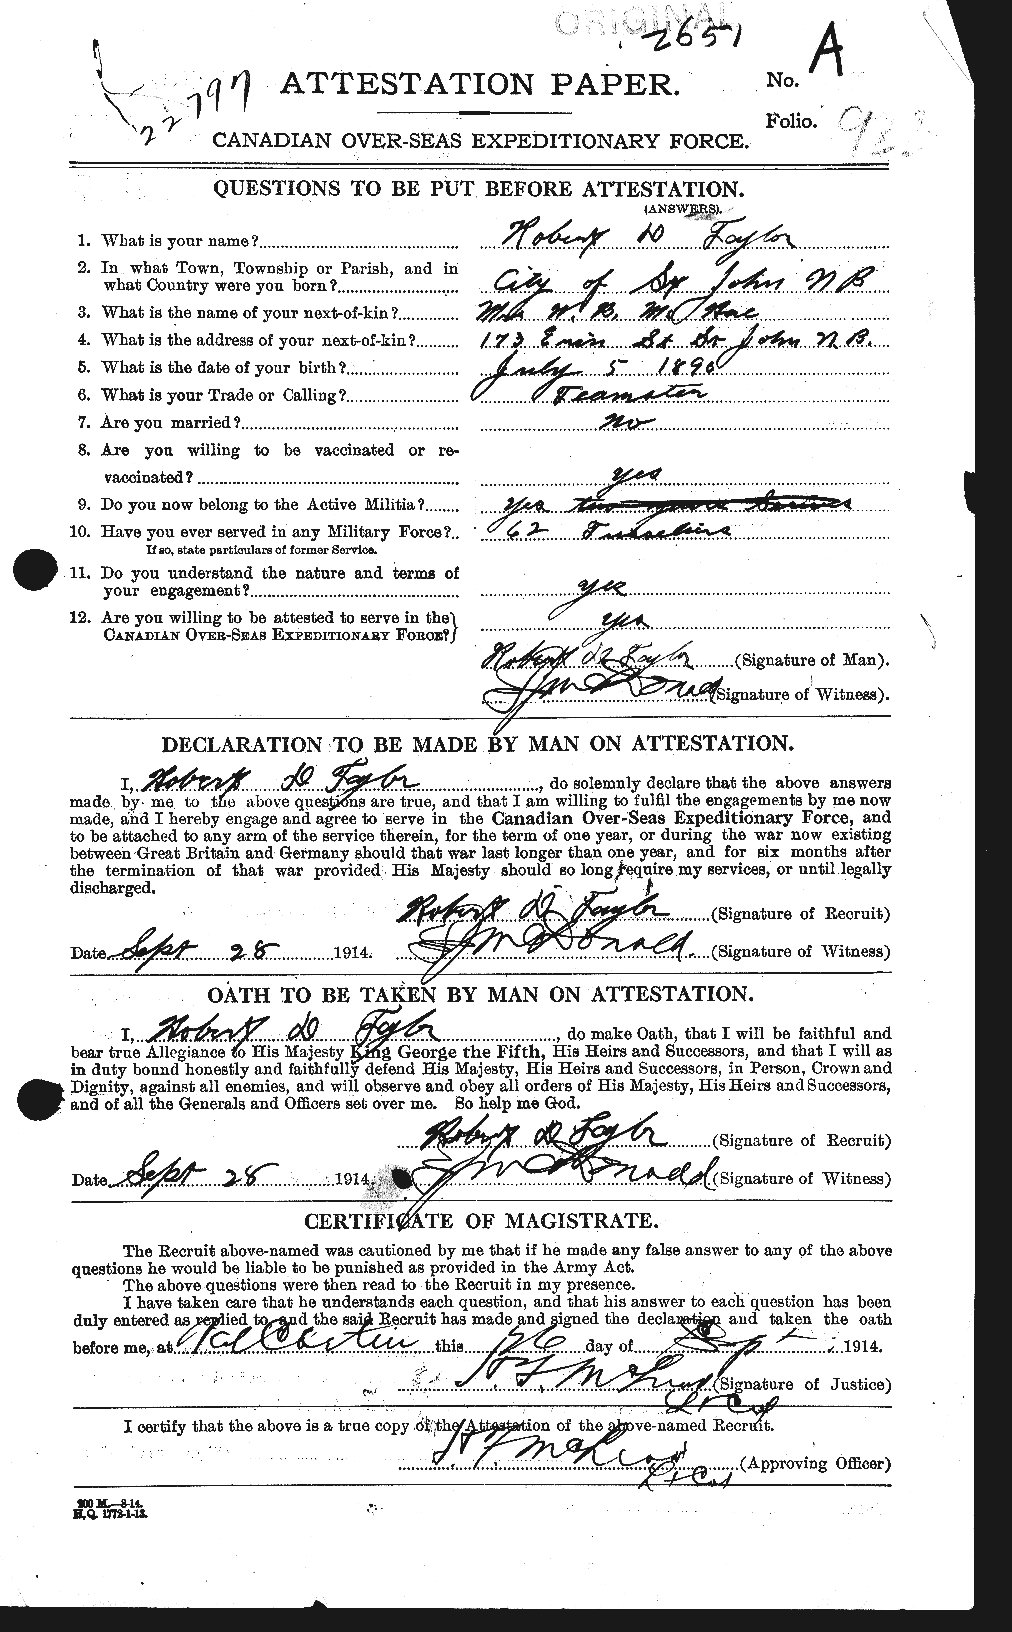 Personnel Records of the First World War - CEF 627468a